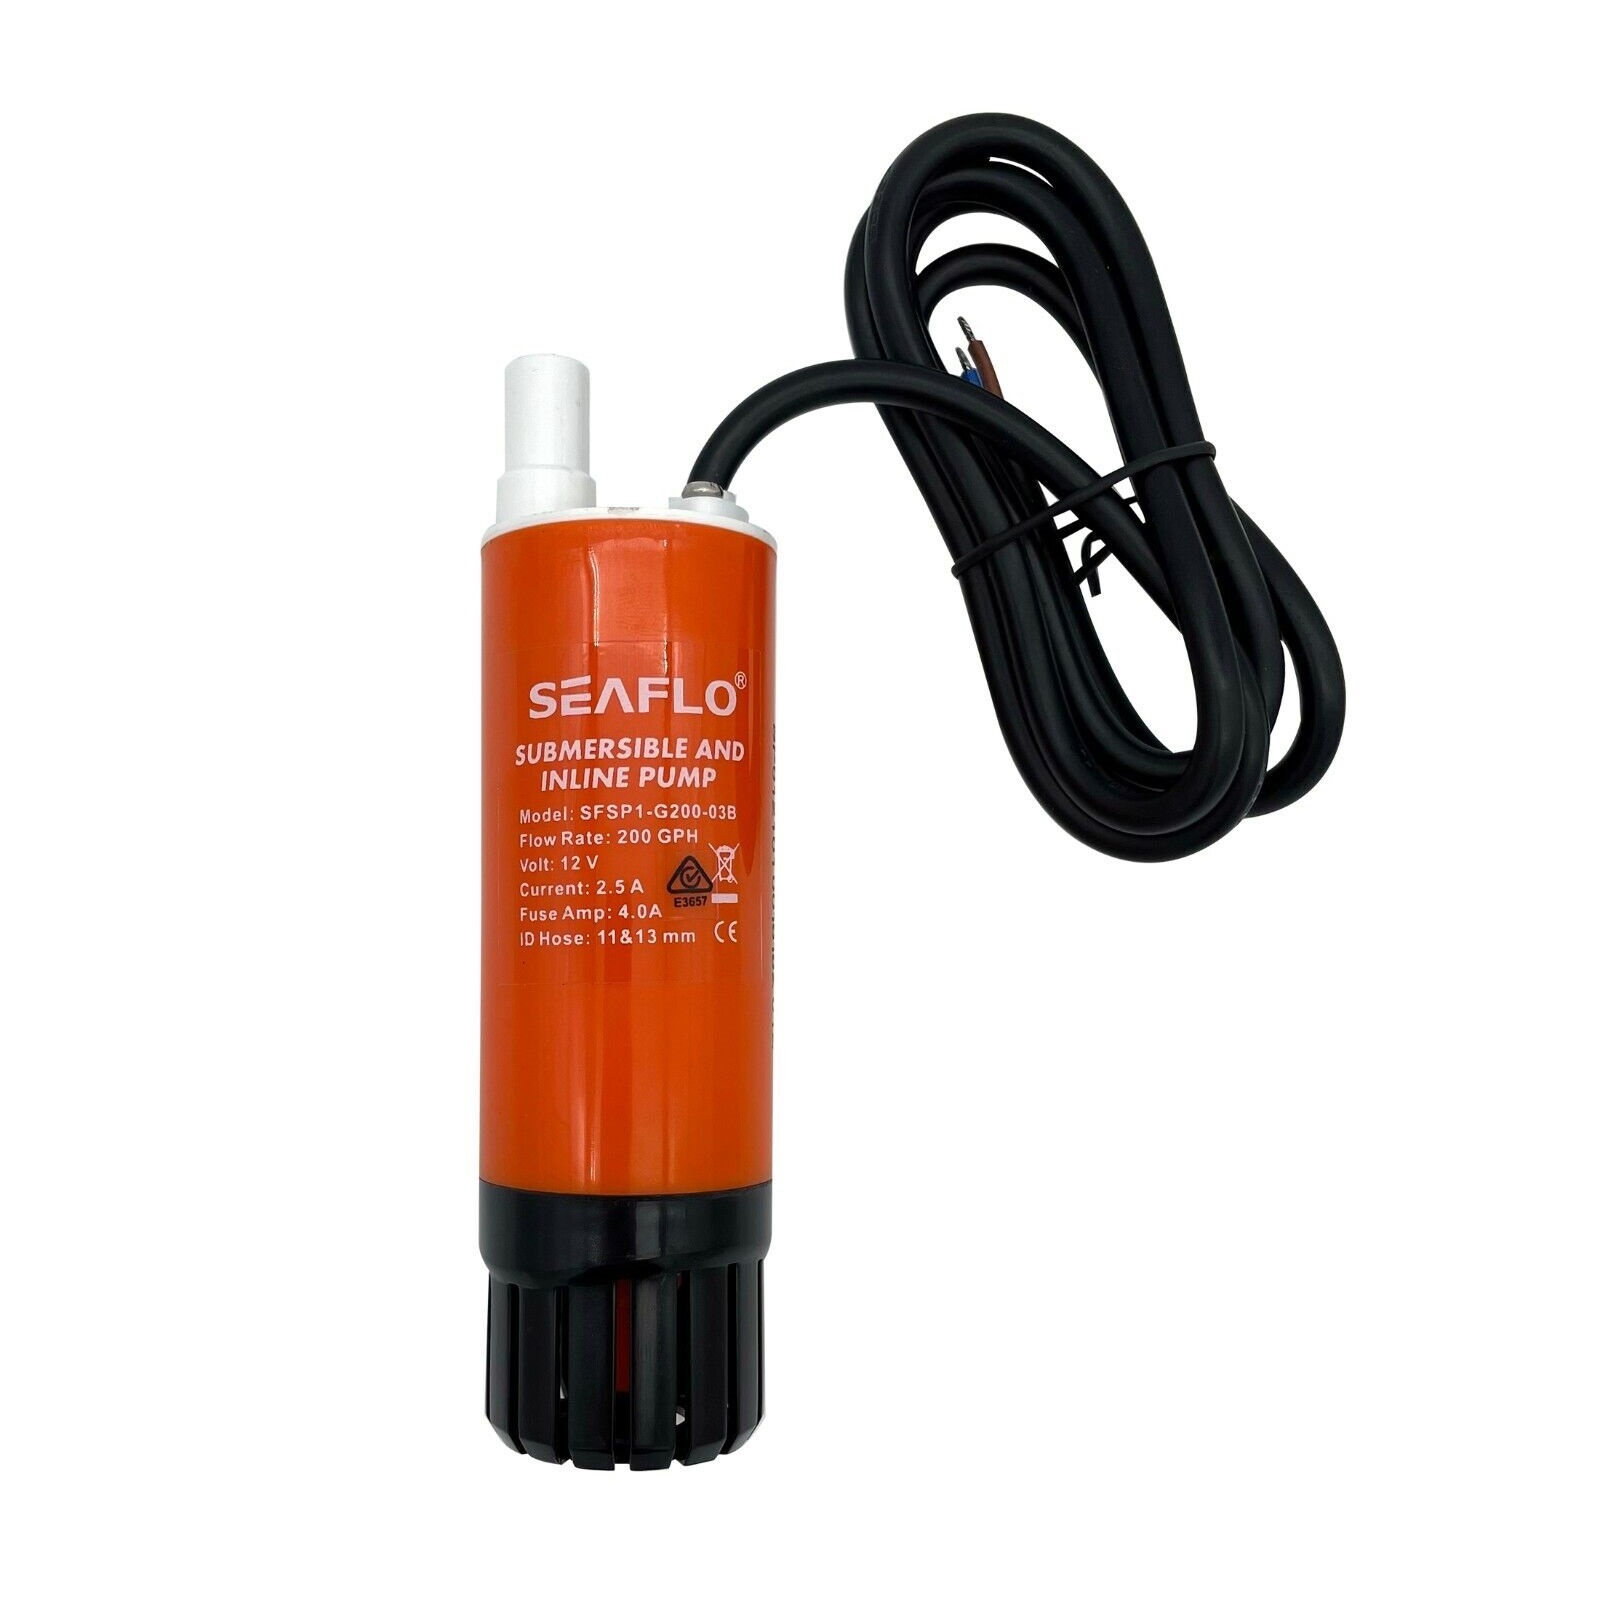 SEAFLO Submersible and Inline Pump 200 GPH